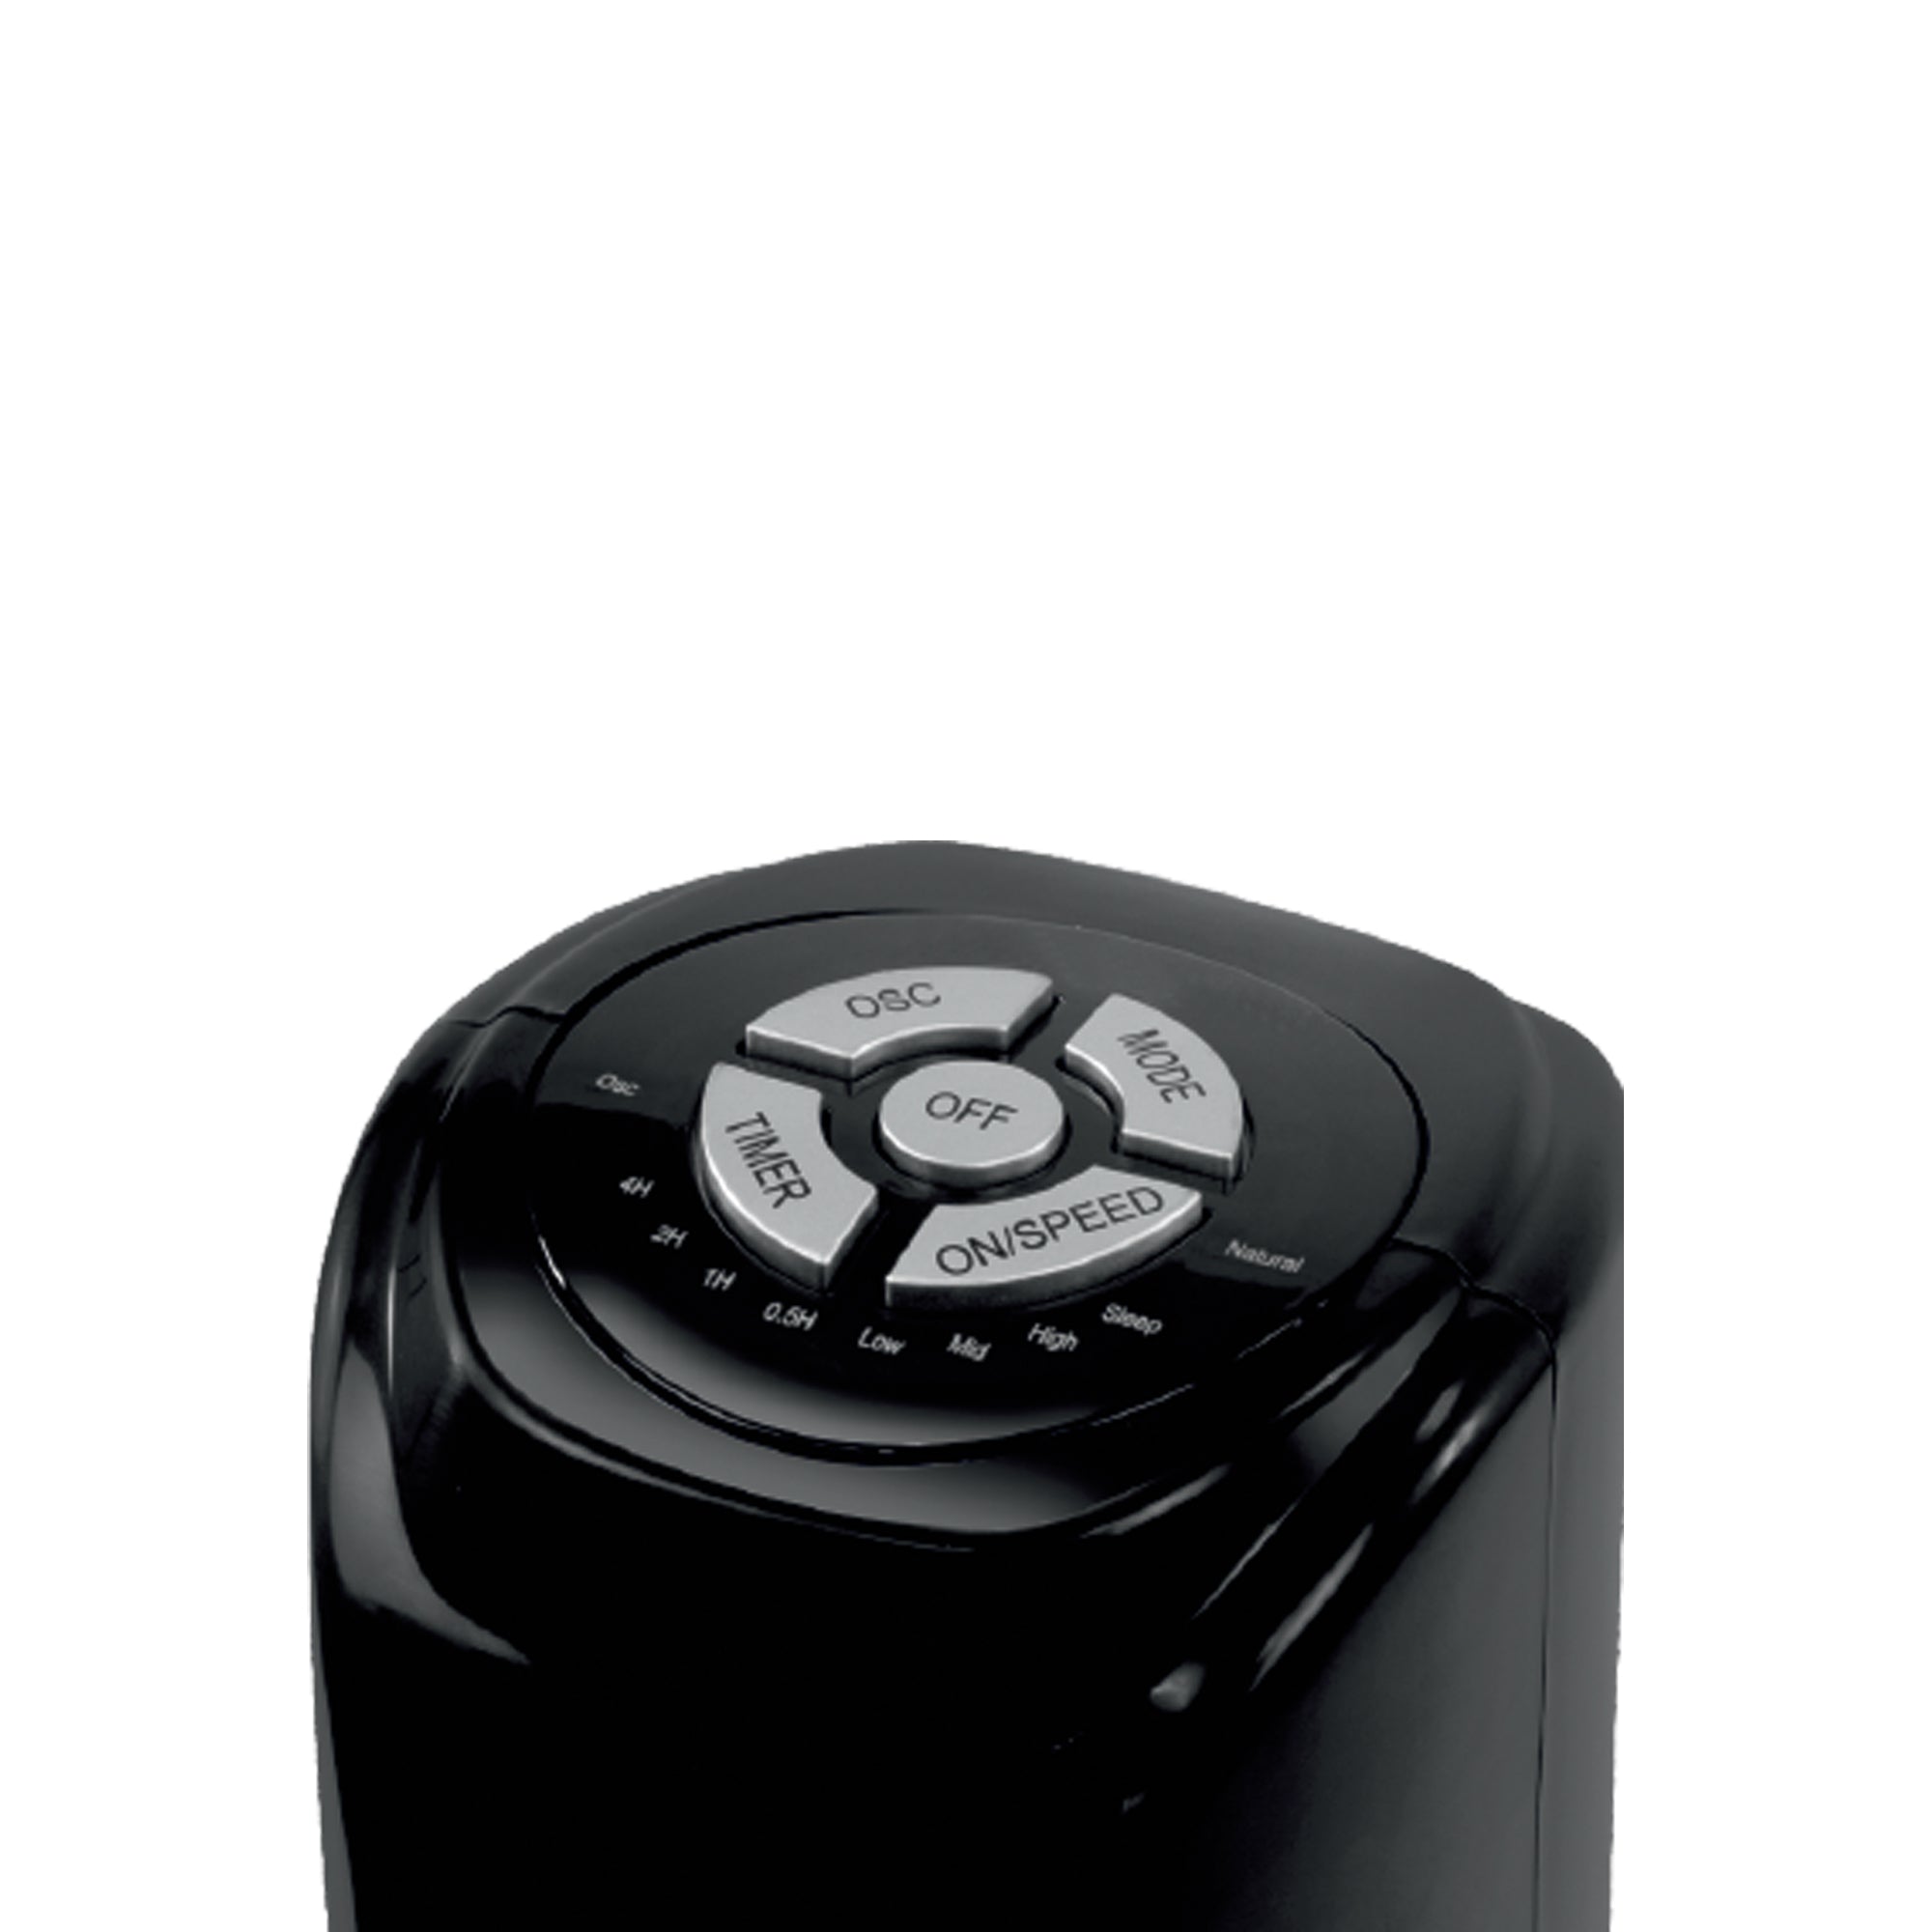 Tower Fan, Oscillating, 7.5 Hour Timer, 29 Inch, Black